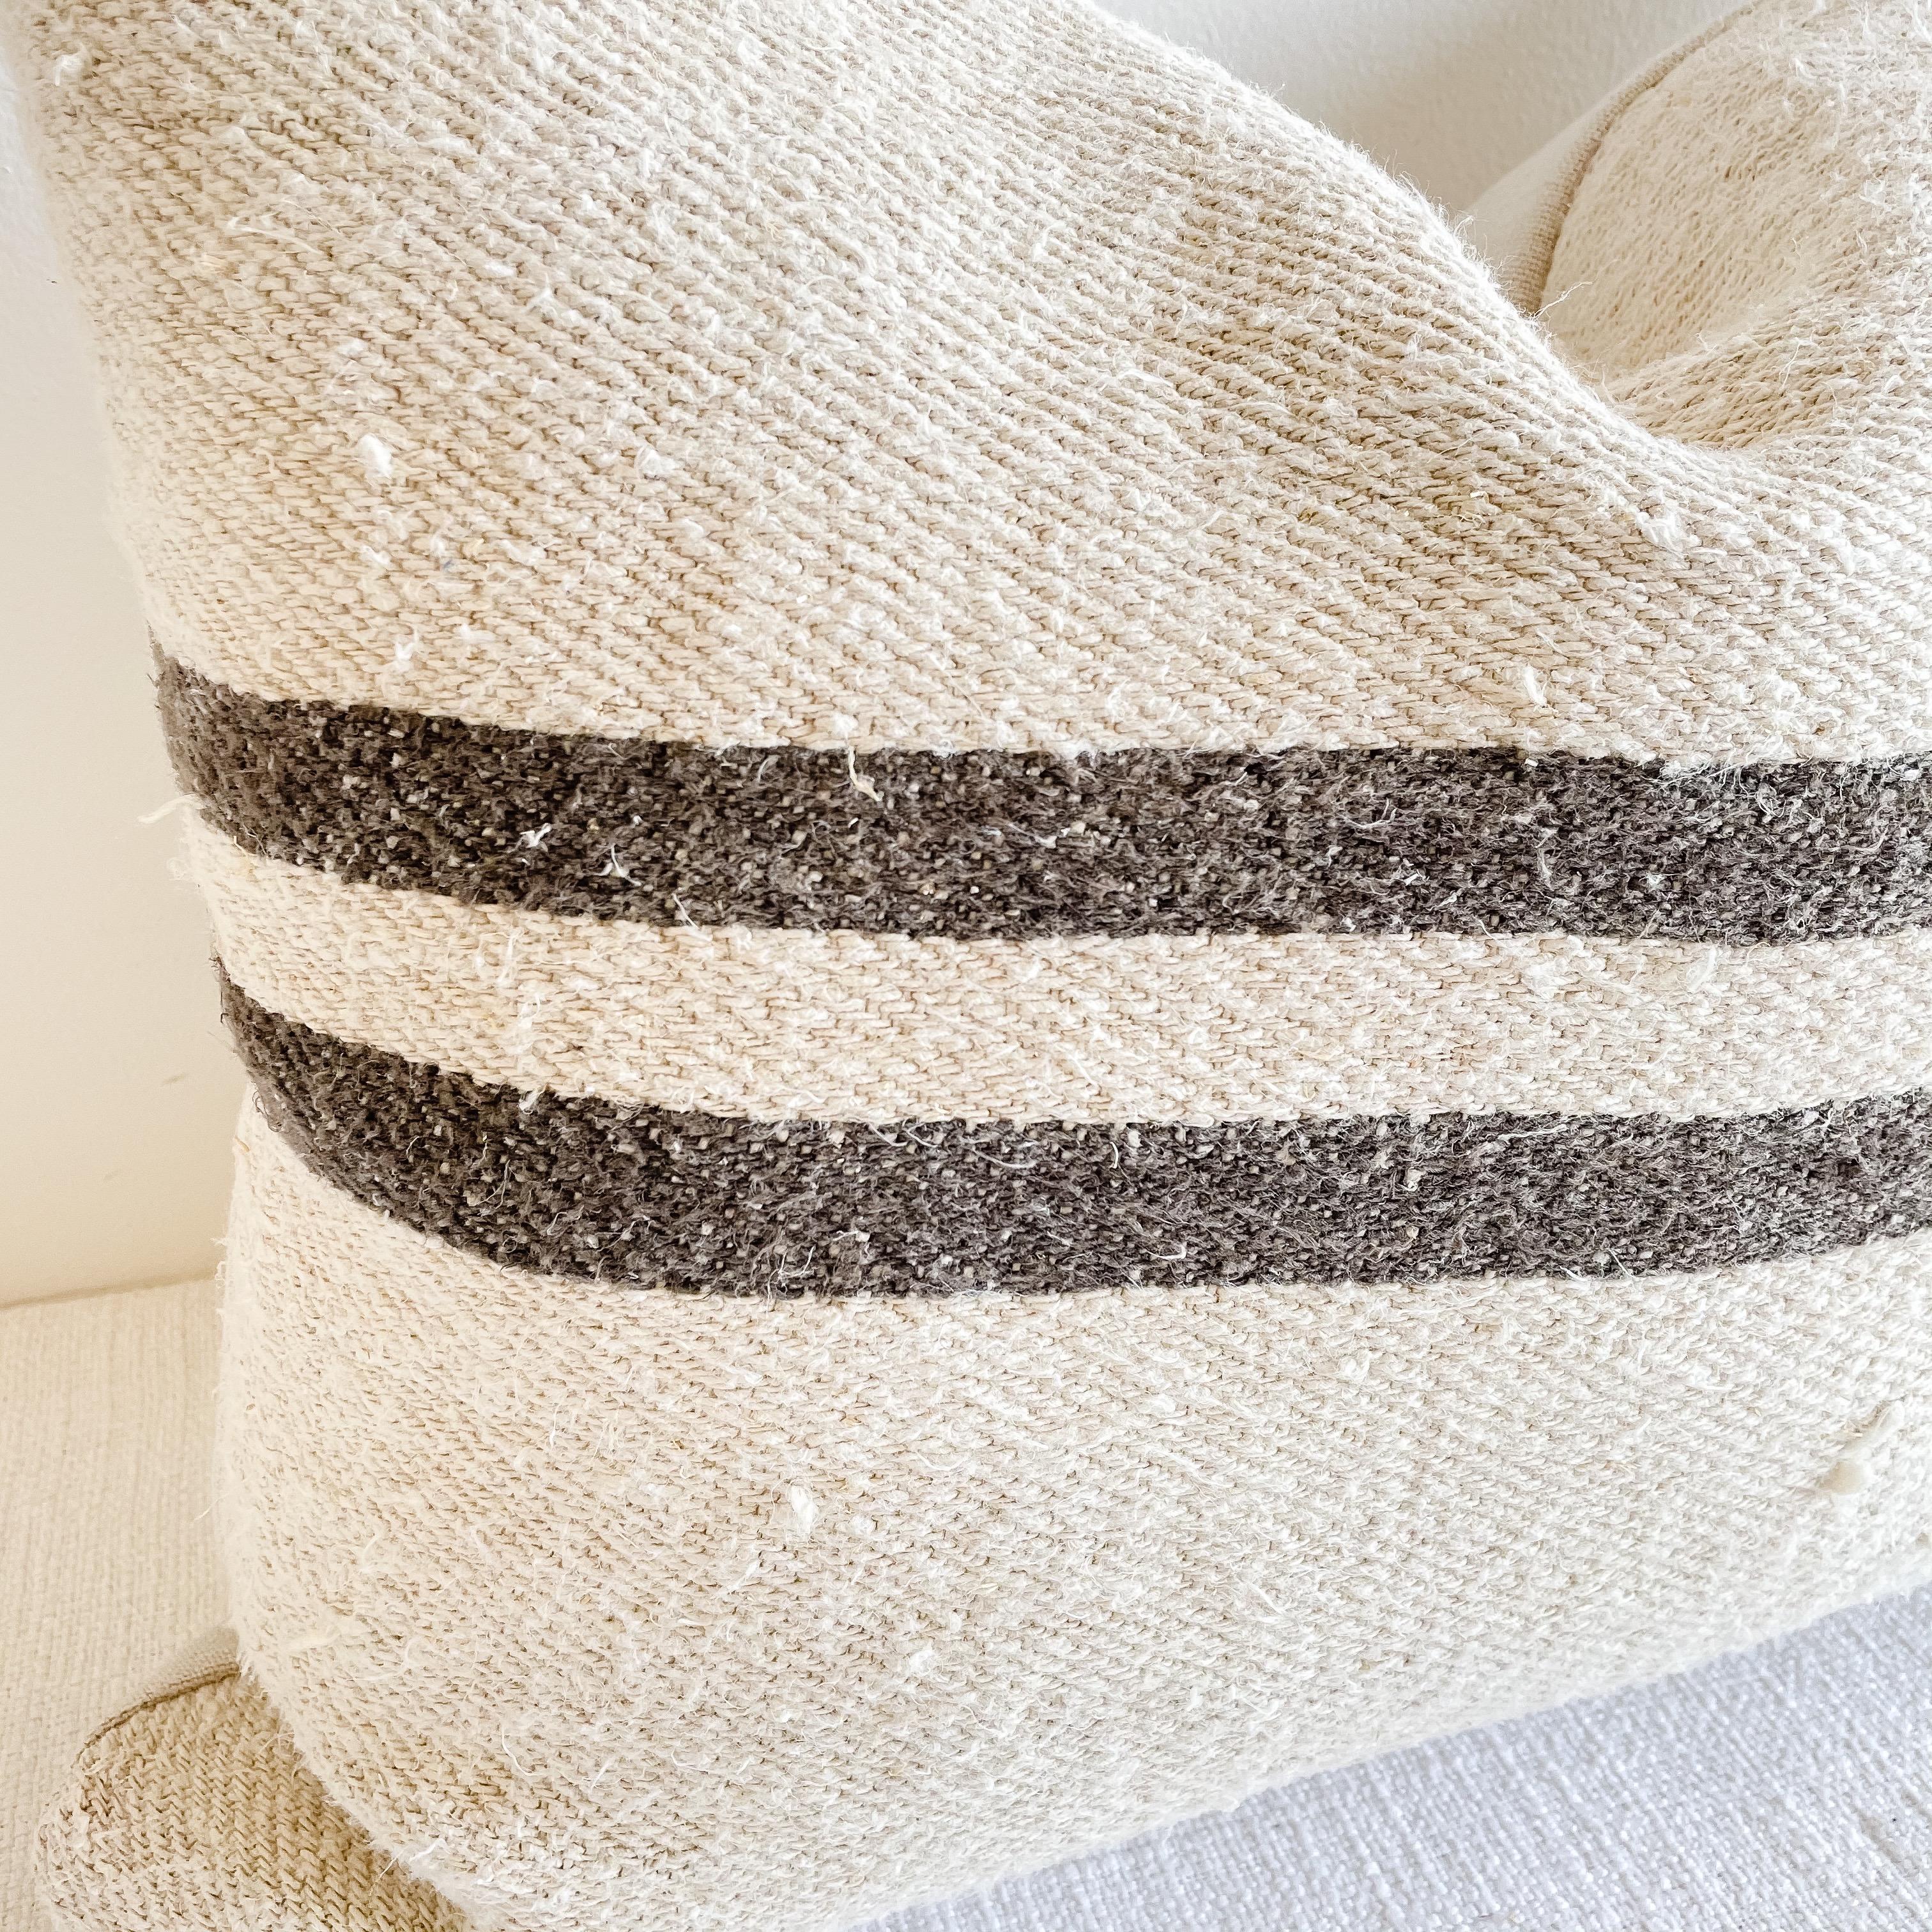 This beautiful vintage grainsack pillow is made from a European farmers grain bag with stripes, and original stipes, and some vintage grain sacks may show original patches or monograming. See photo details.
Color: Natural flax with deep brown